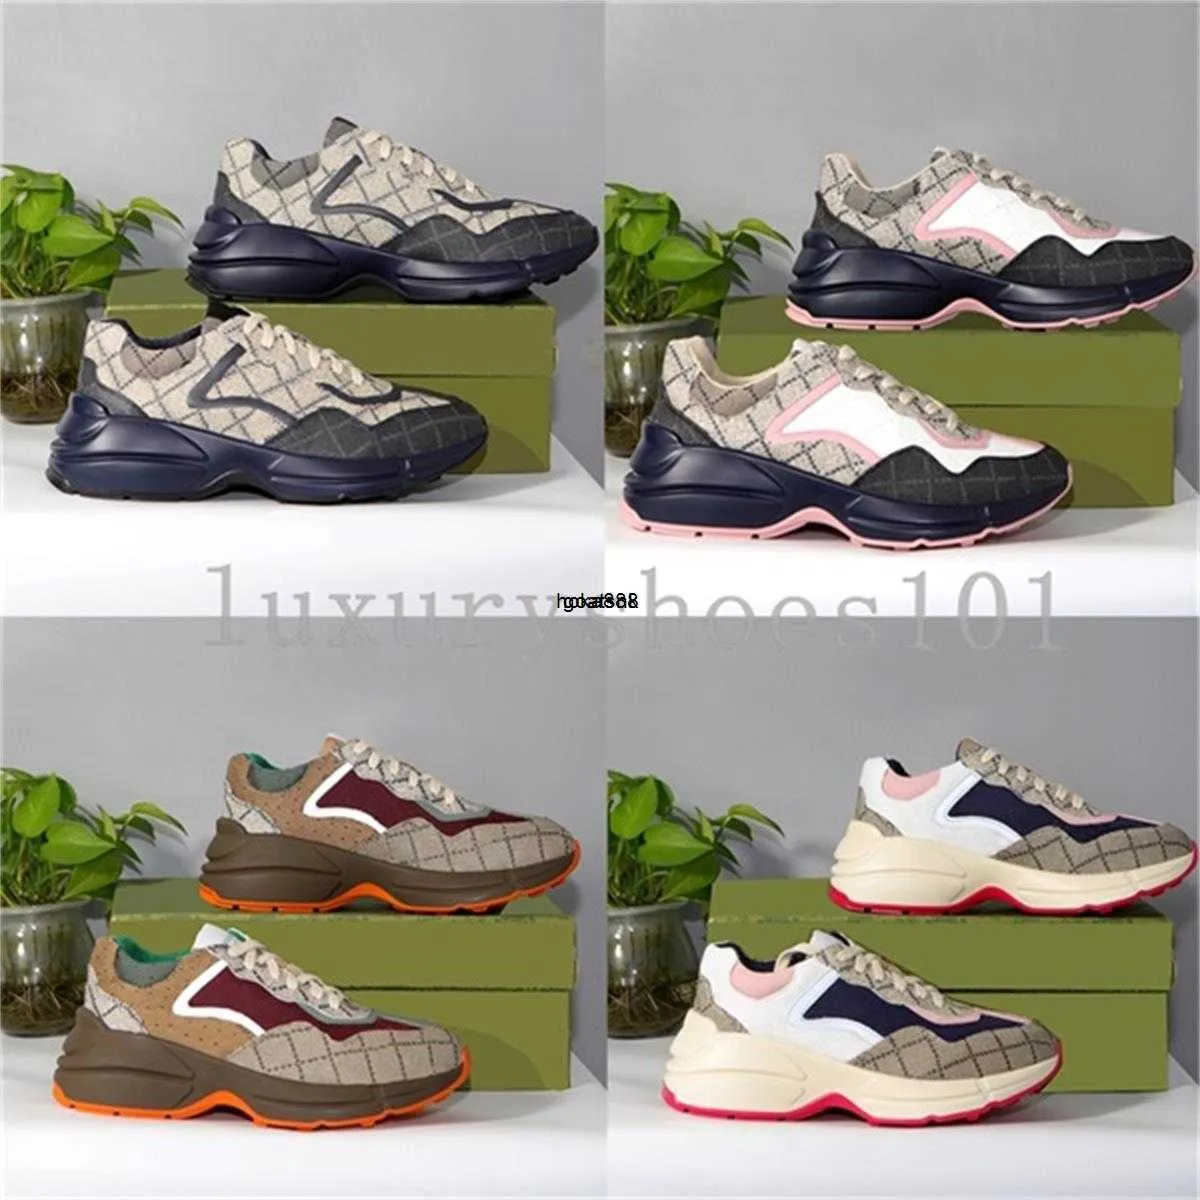 Brand Designer Casual Shoes Rhyton Multicolor Women Mens Sneakers Trainers Vintage Genuine Leather Chaussures Shoe Increase Platform Leisure Sneaker Box 35-46